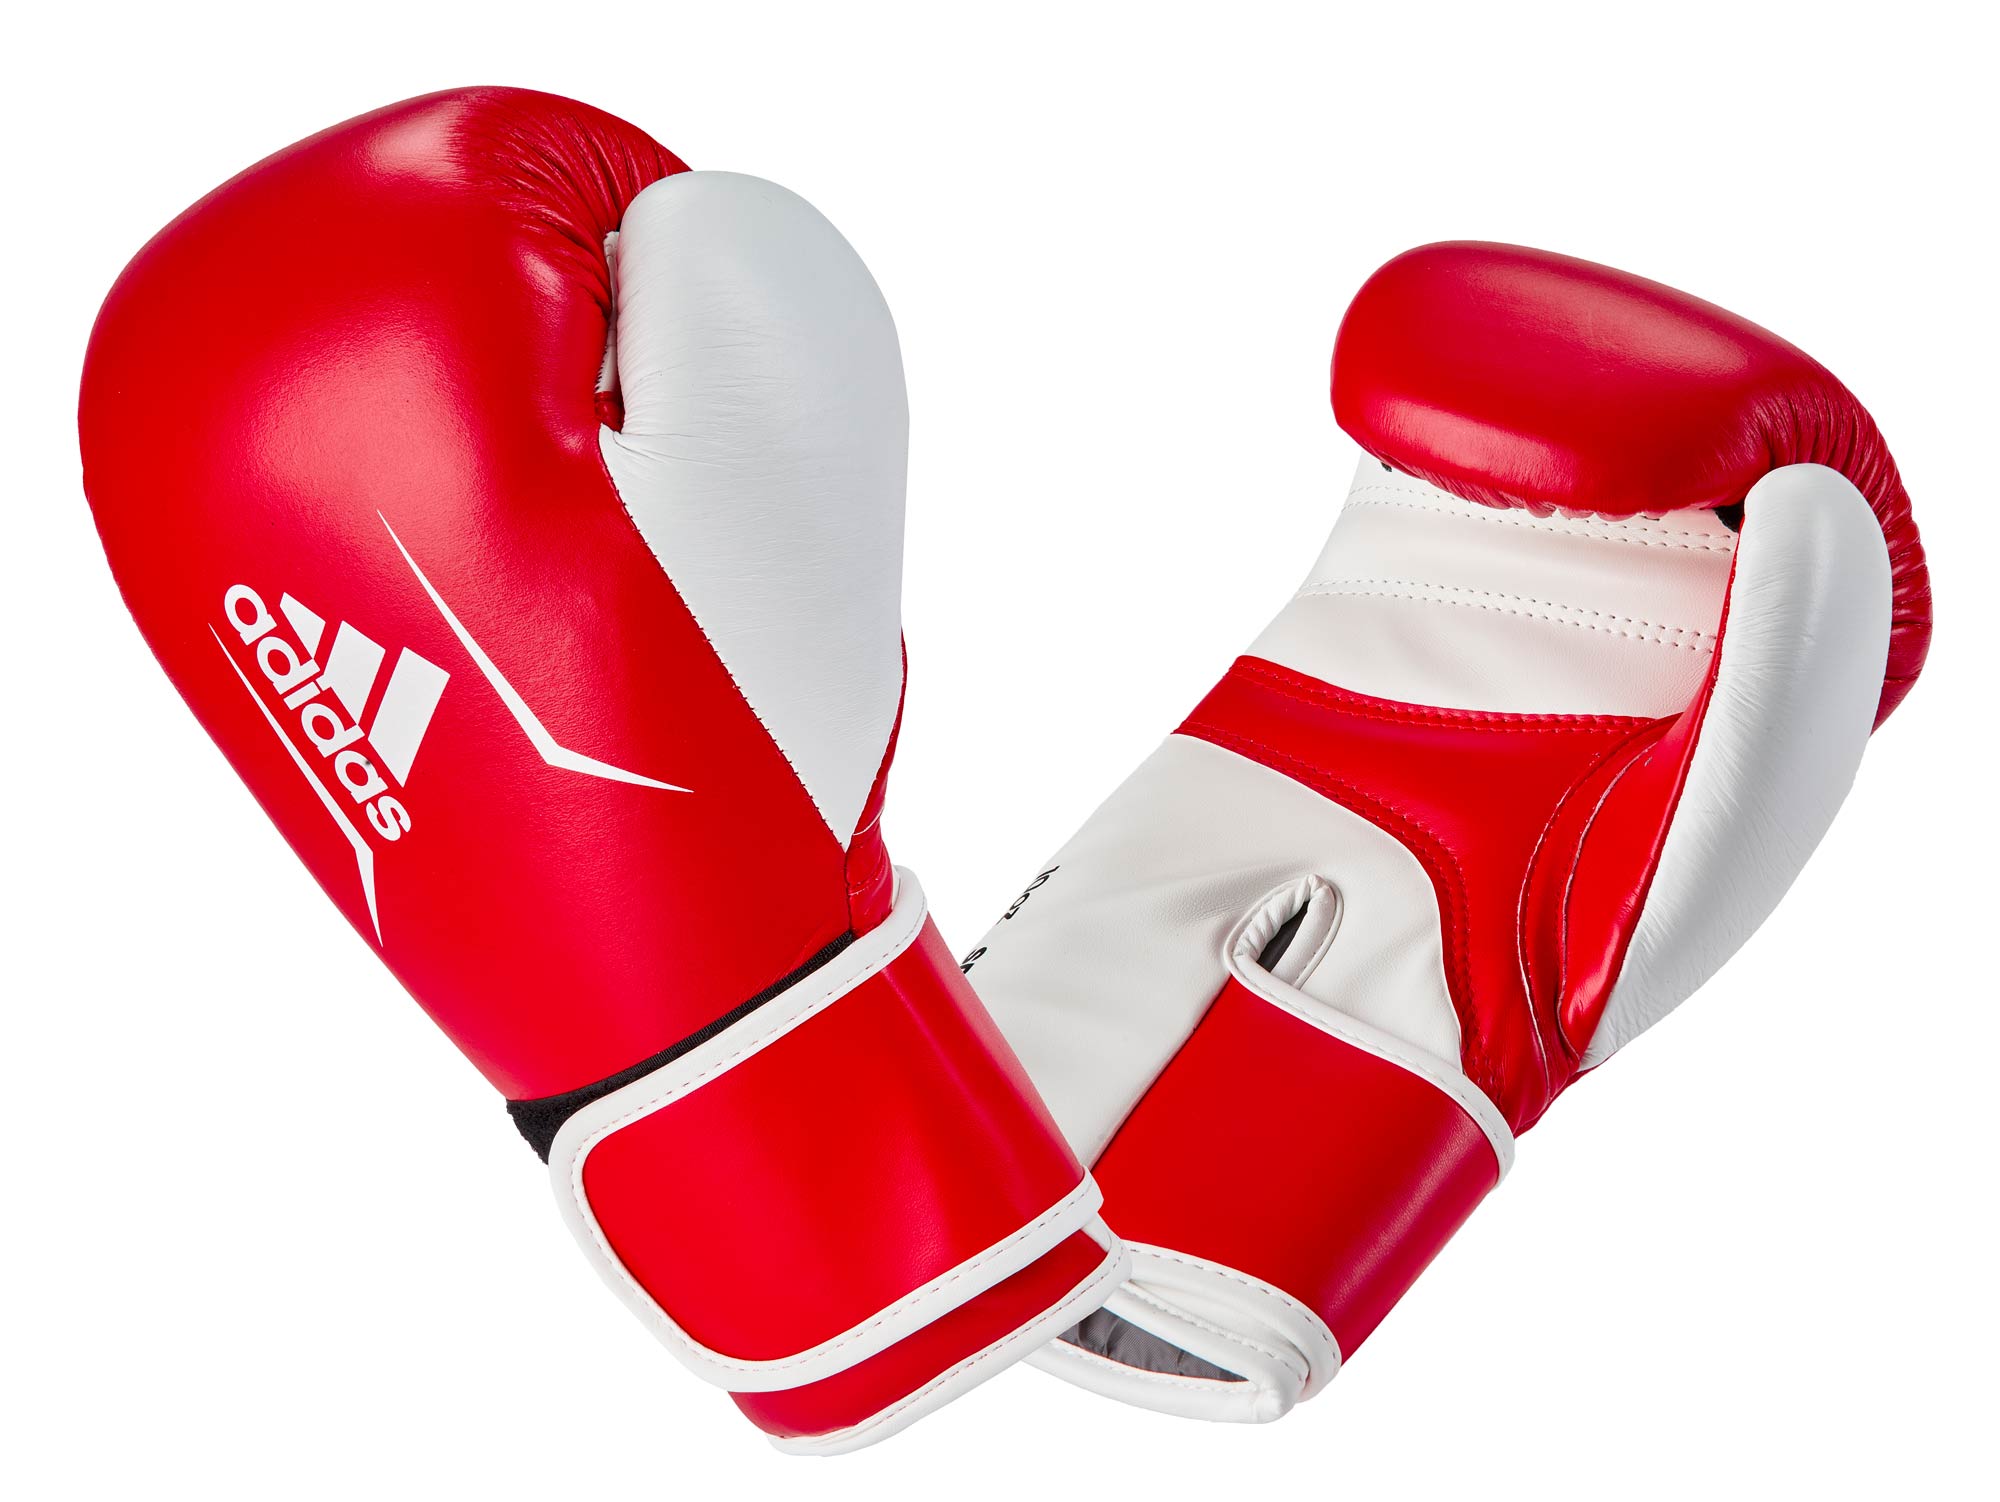 adidas competition glove Speed 165 adiSBG165, red/white